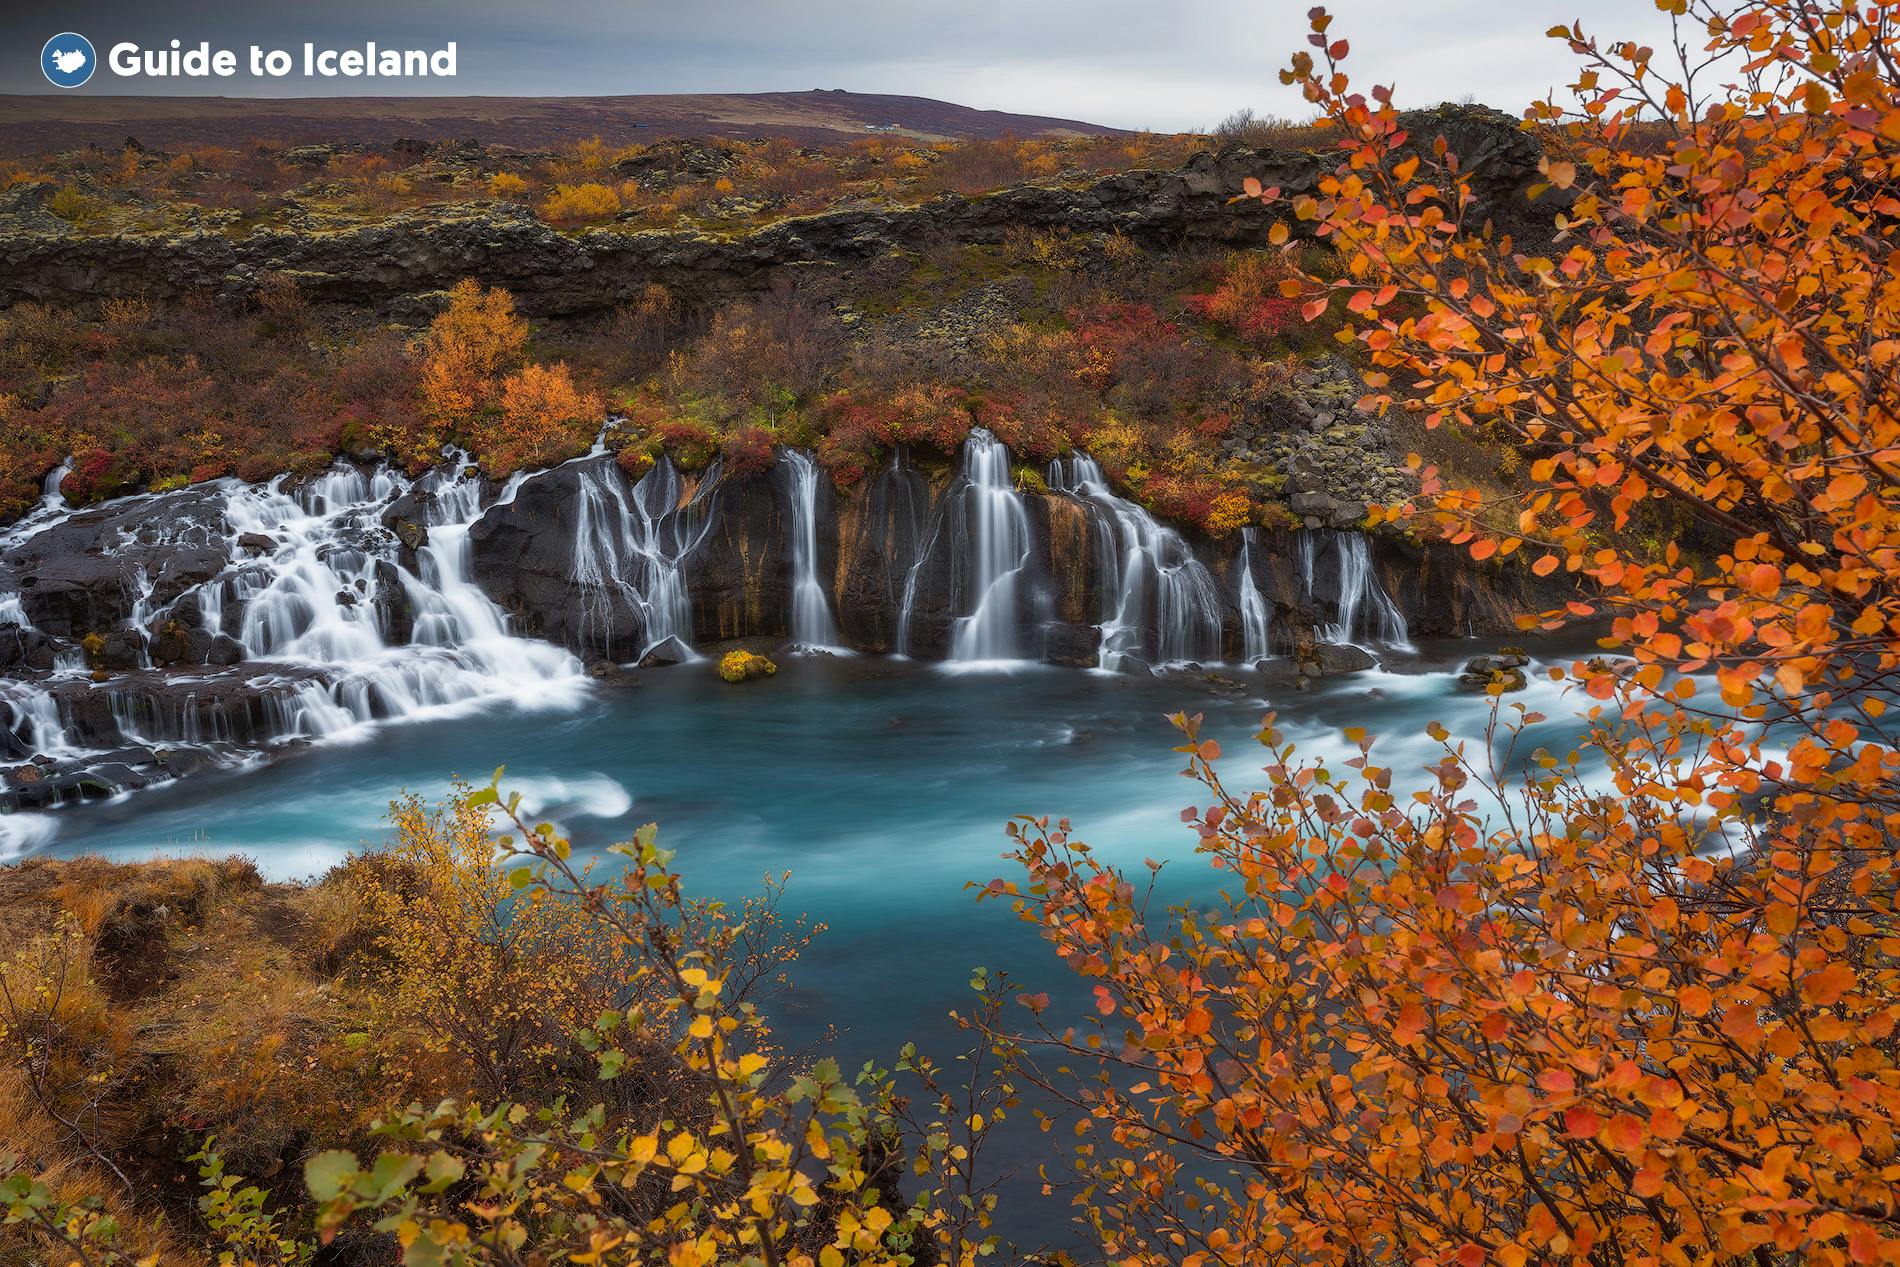 Hraunfossar waterfalls in West Iceland appear from underneath the lava!